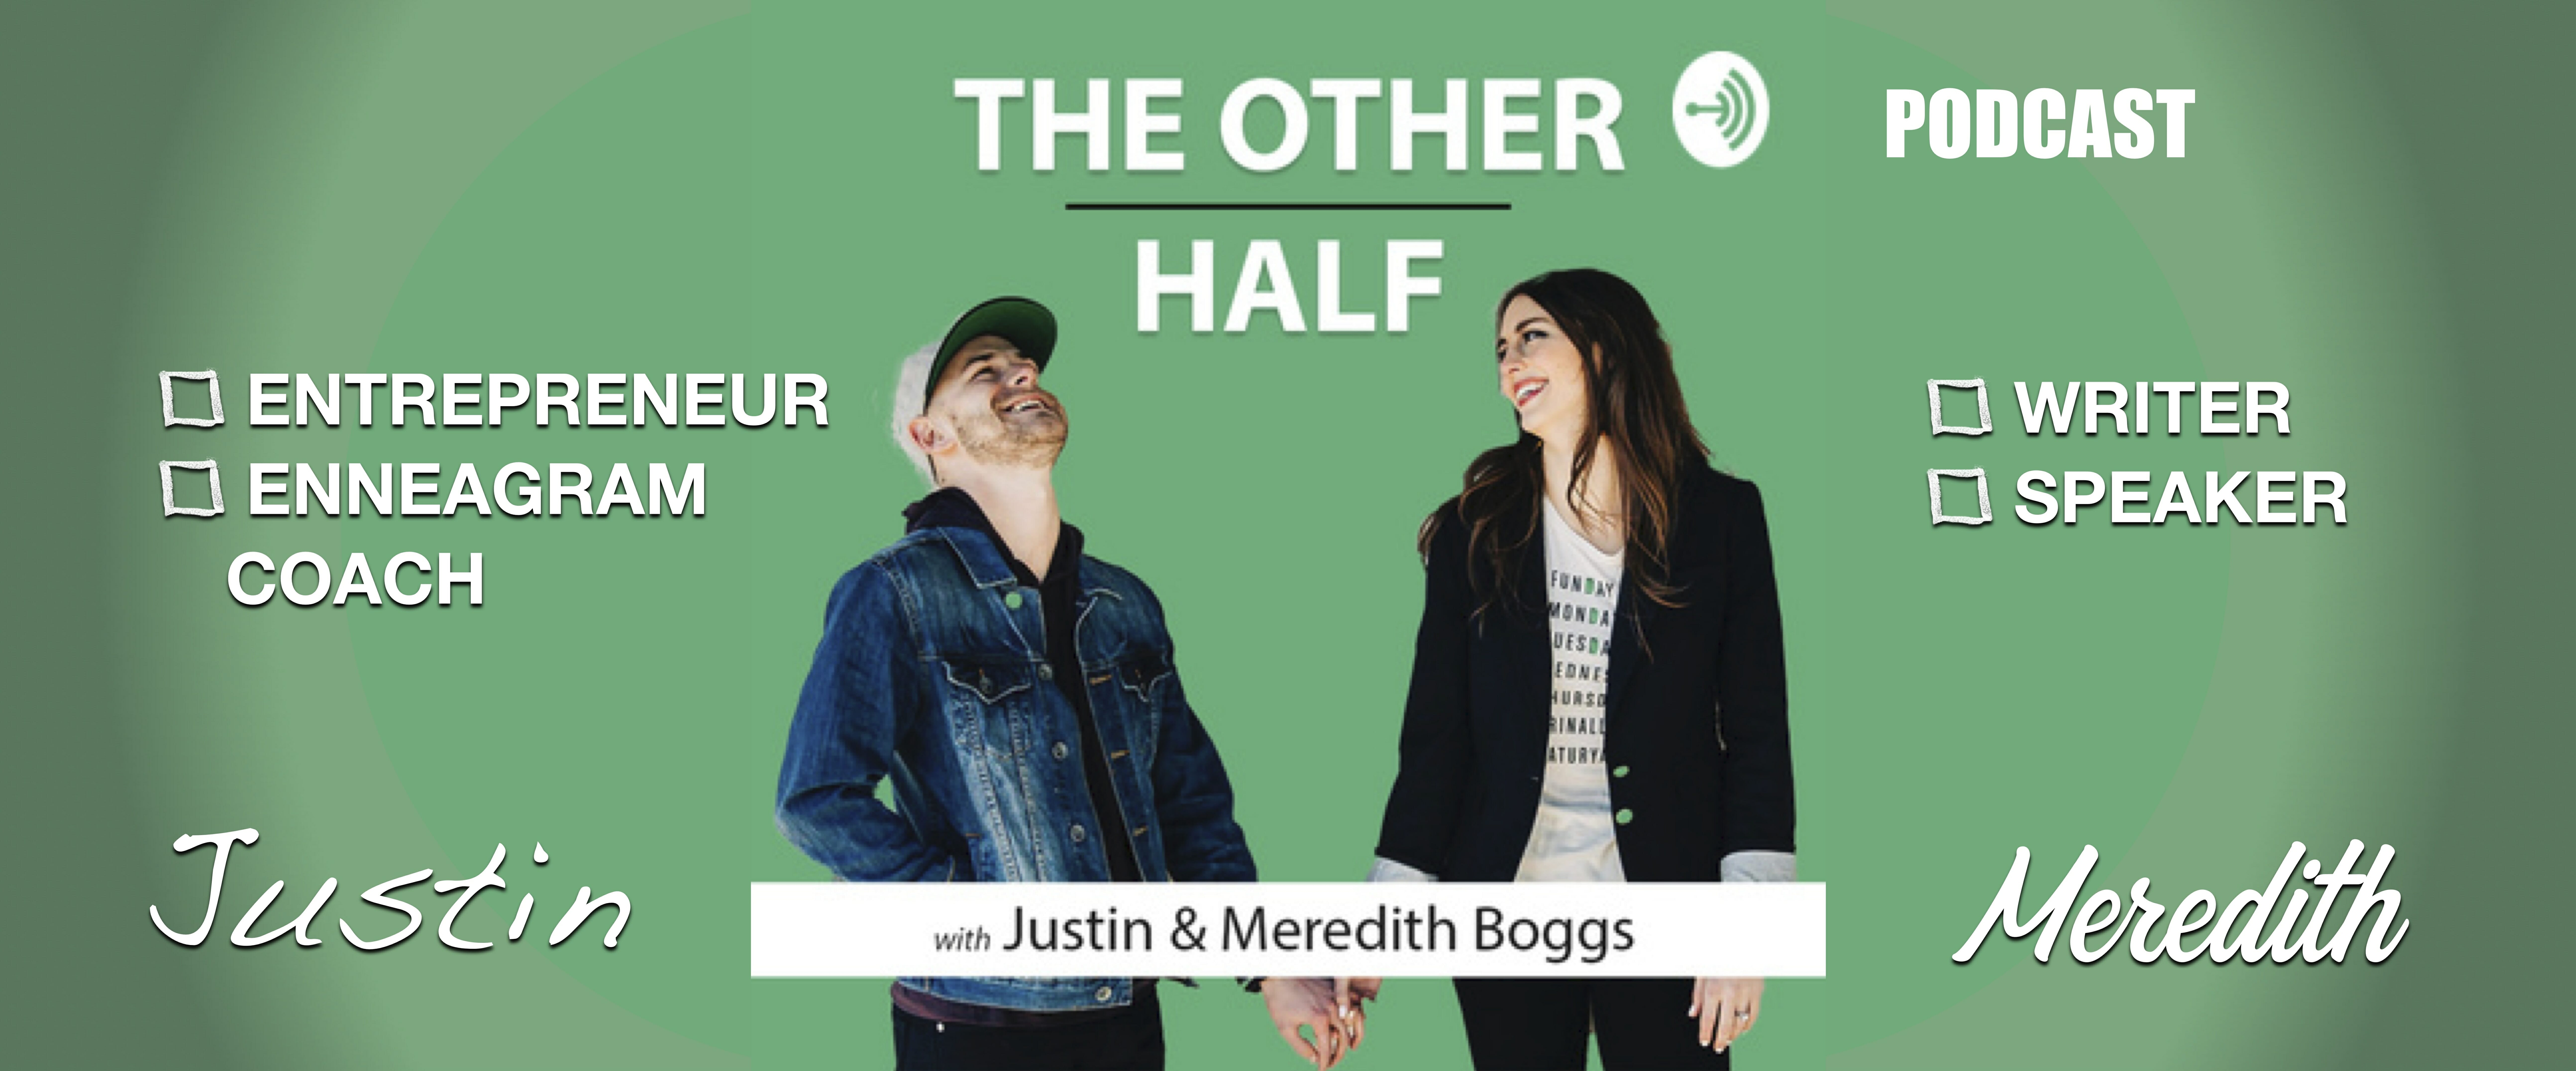 THE OTHER HALF PODCAST: Quitting Your Job (Being Your Own Boss Isn